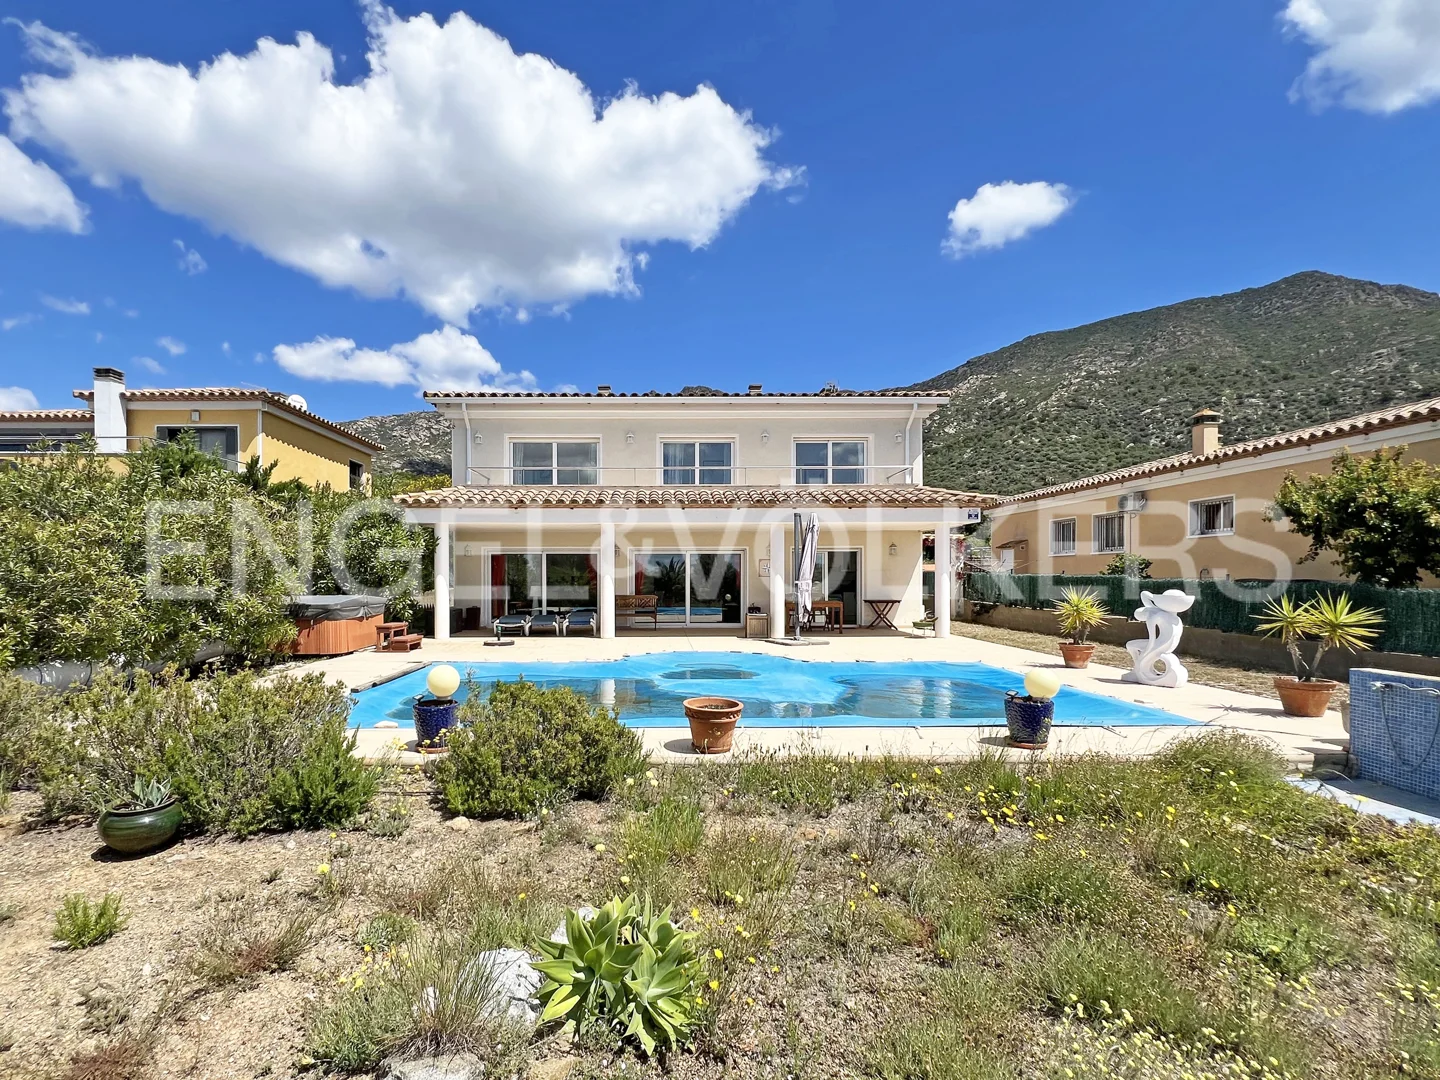 Beautiful house with views, garden, and pool just 10 minutes from the sea.